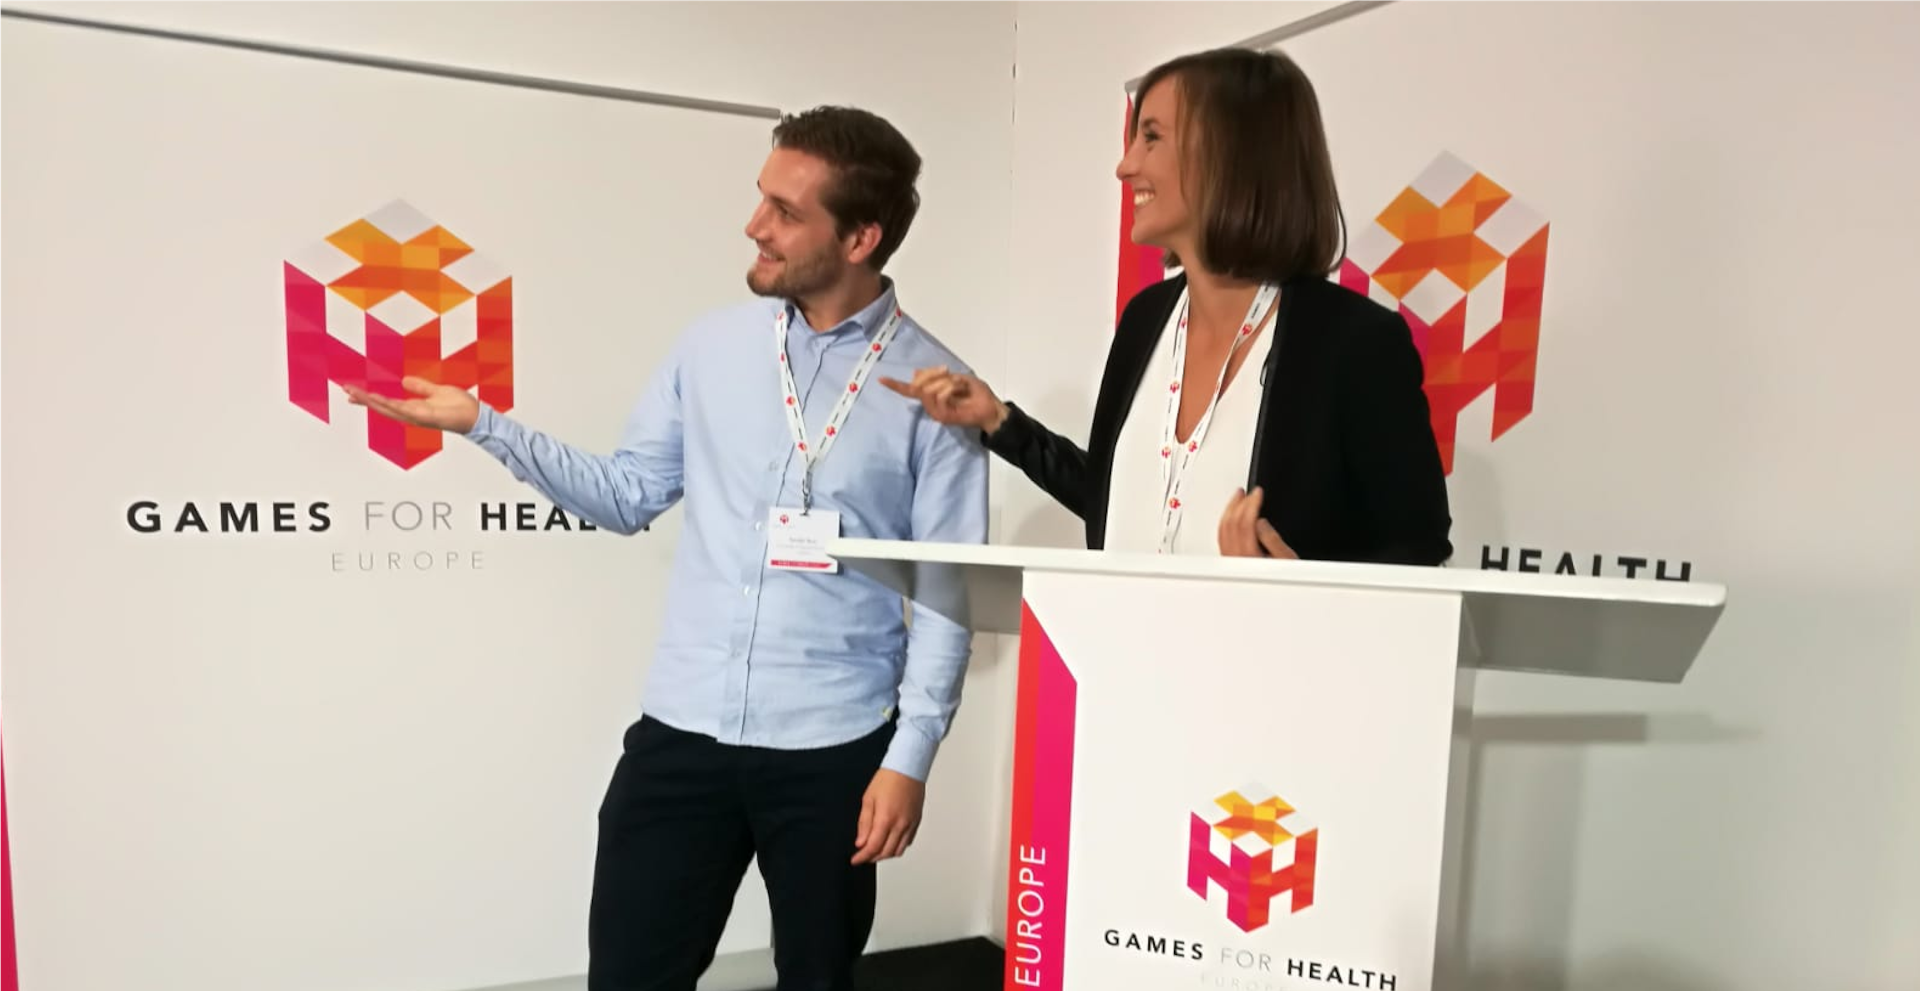 Presenting the spirit application at the Games for Health - Europe conference together with Carmen Scherbaum